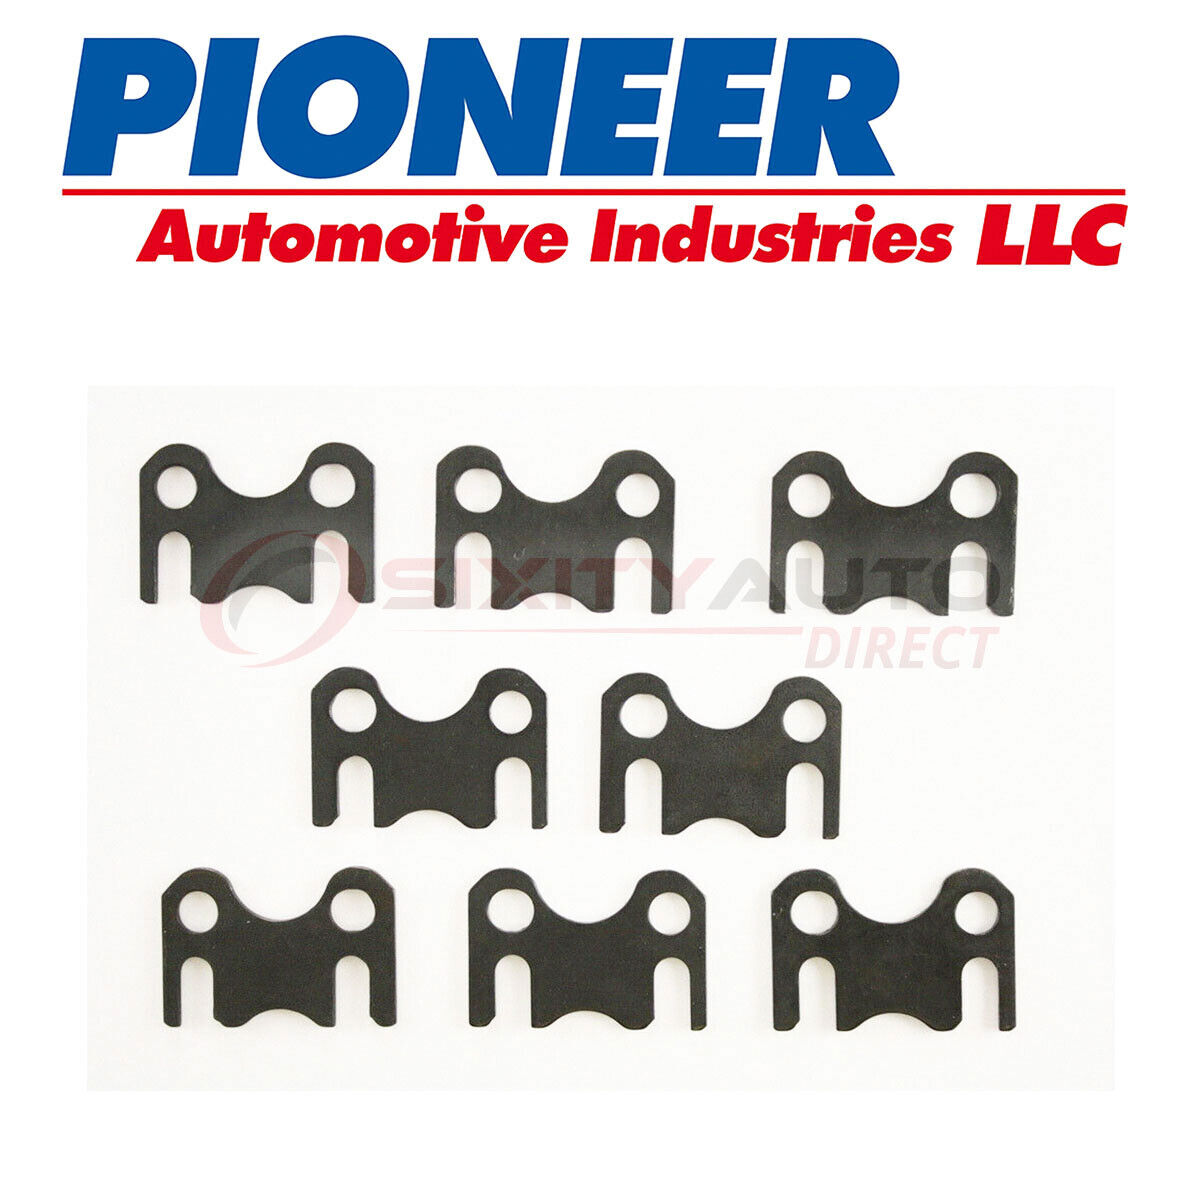 Pioneer Push Rod Guide Plate for 1978 Oldsmobile Cutlass Supreme 5.7L V8 – is